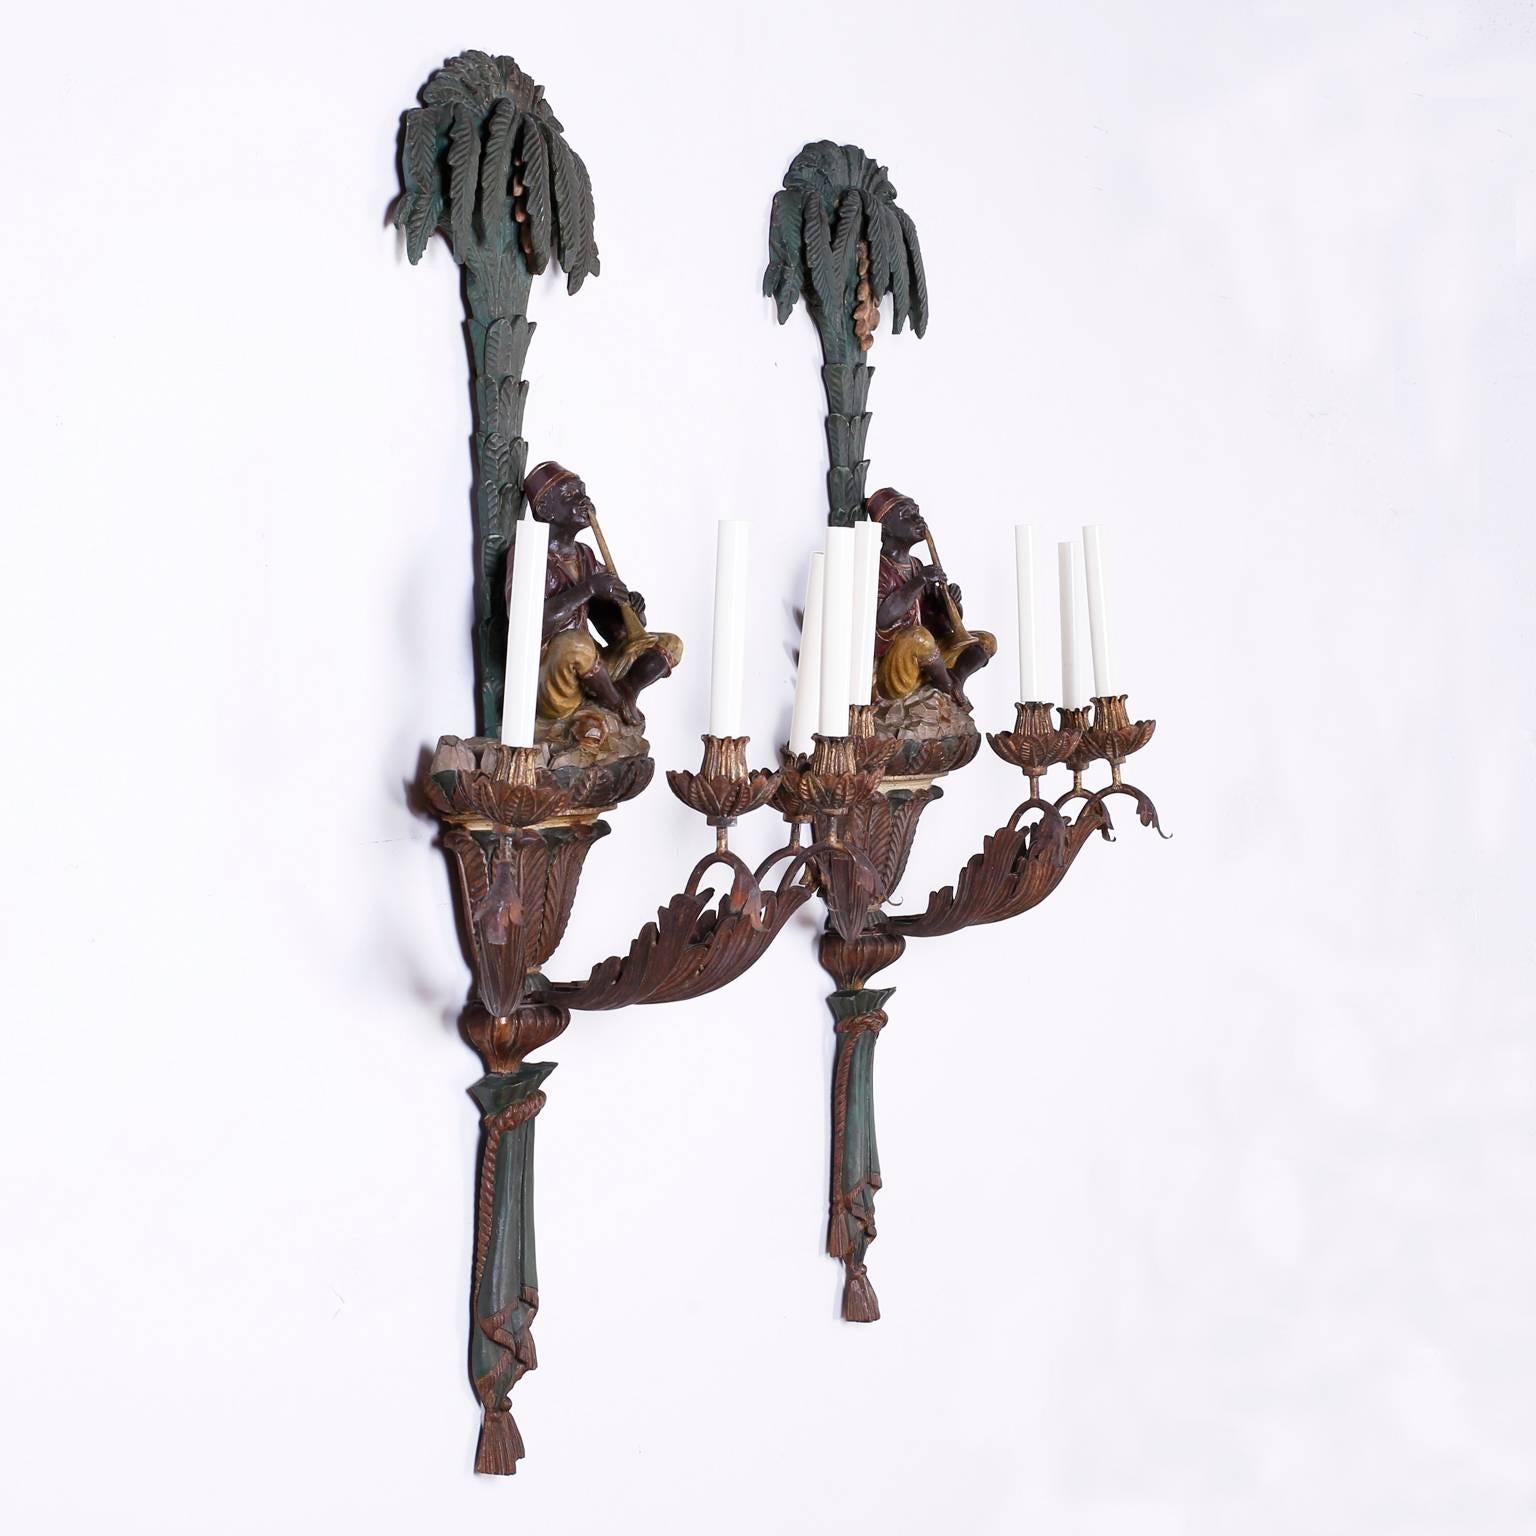 Rare and dramatic pair of carved wood French sconces depicting polychrome Moroccan or Moorish musicians under coconut palm trees. Each sconce has four lights on metal arms with acanthus leaves connected to a carved center bulb stylized carved rope,